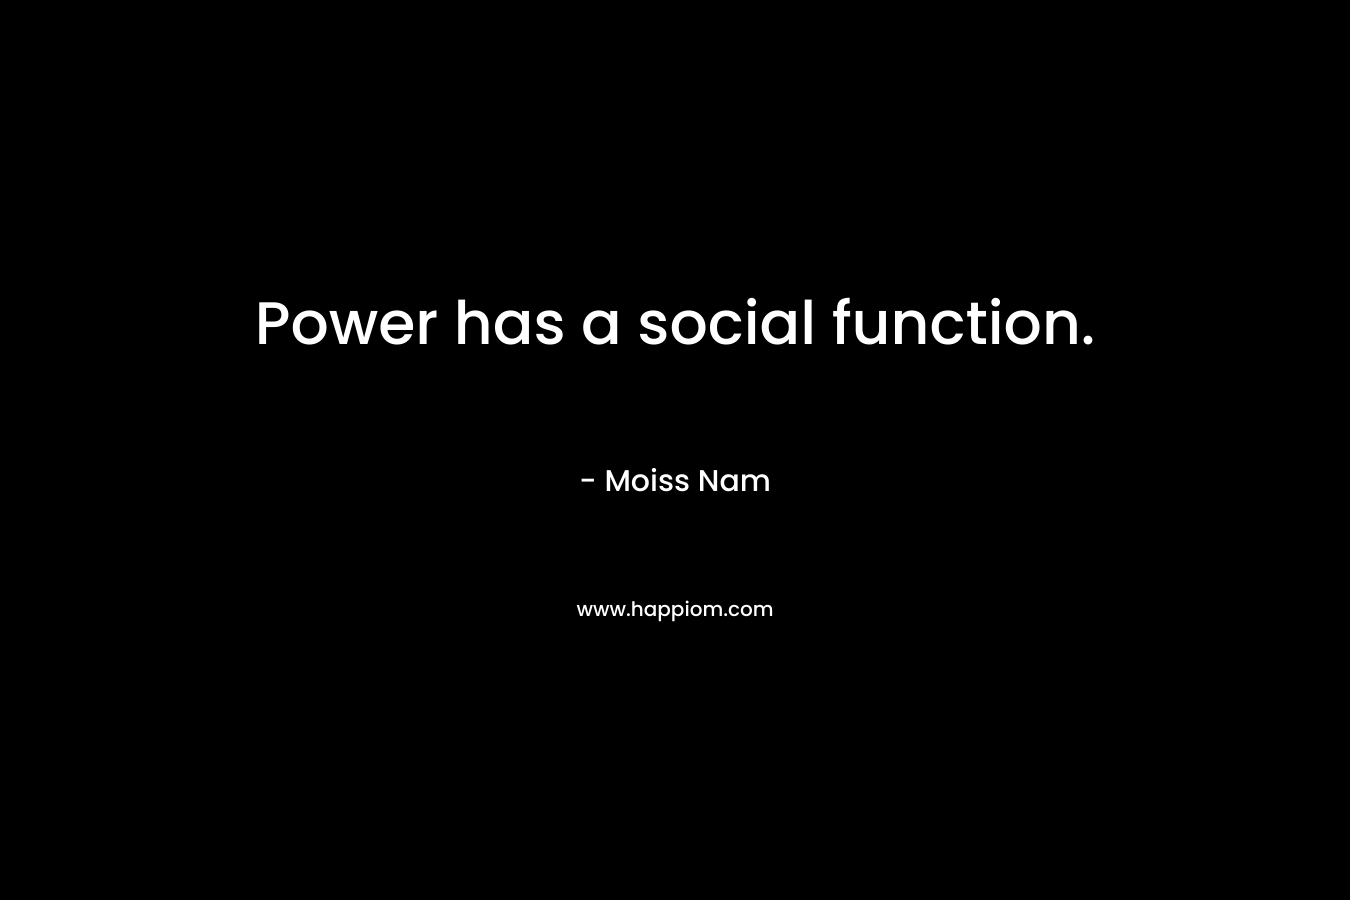 Power has a social function.